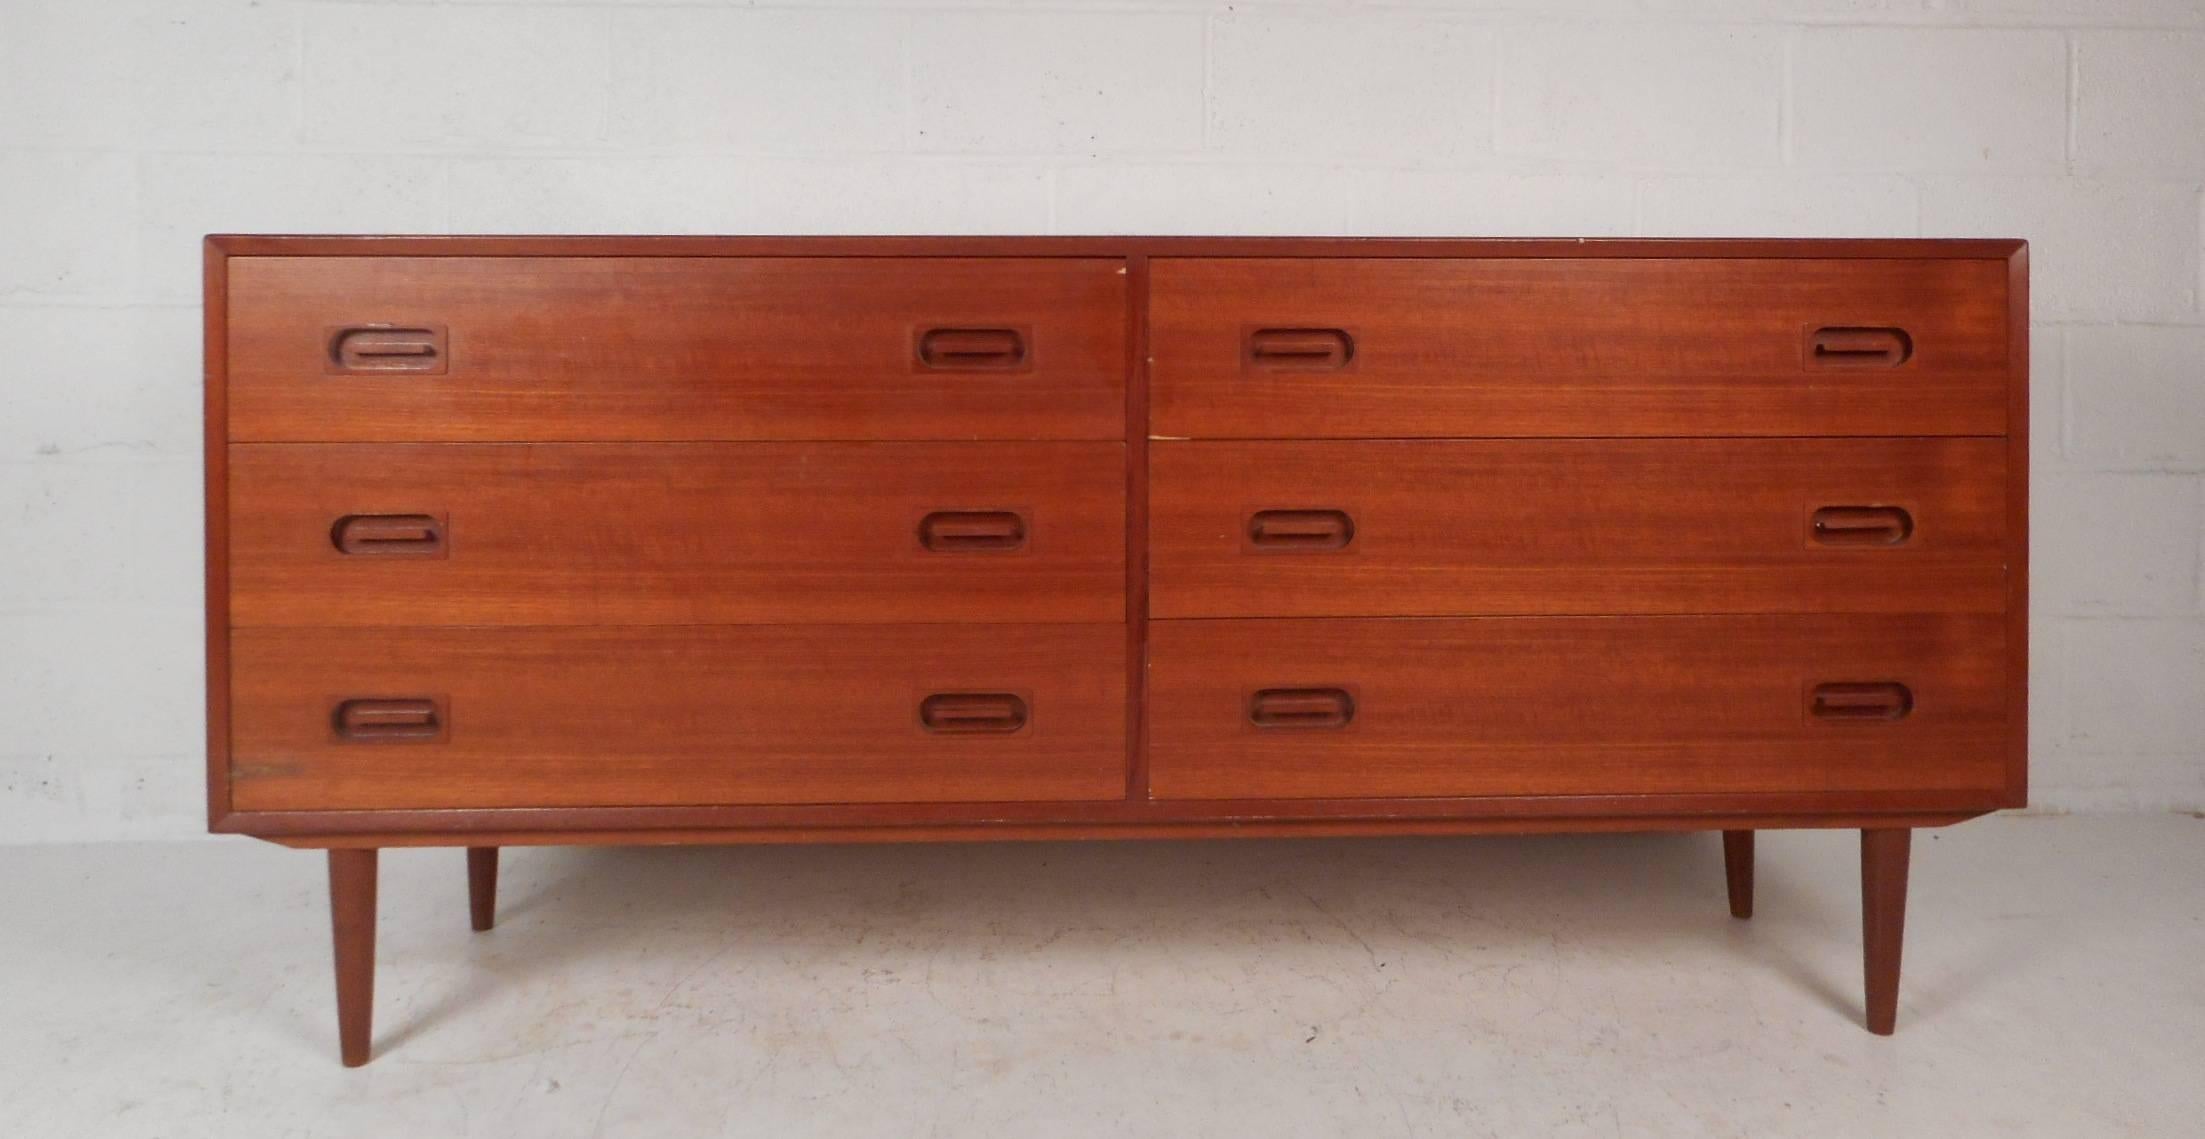 This gorgeous vintage modern dresser features six hefty drawers with unusual oval recessed pulls. Quality craftsmanship with elegant teak wood grain and tapered legs add to the midcentury appeal. This stunning case piece makes the perfect addition